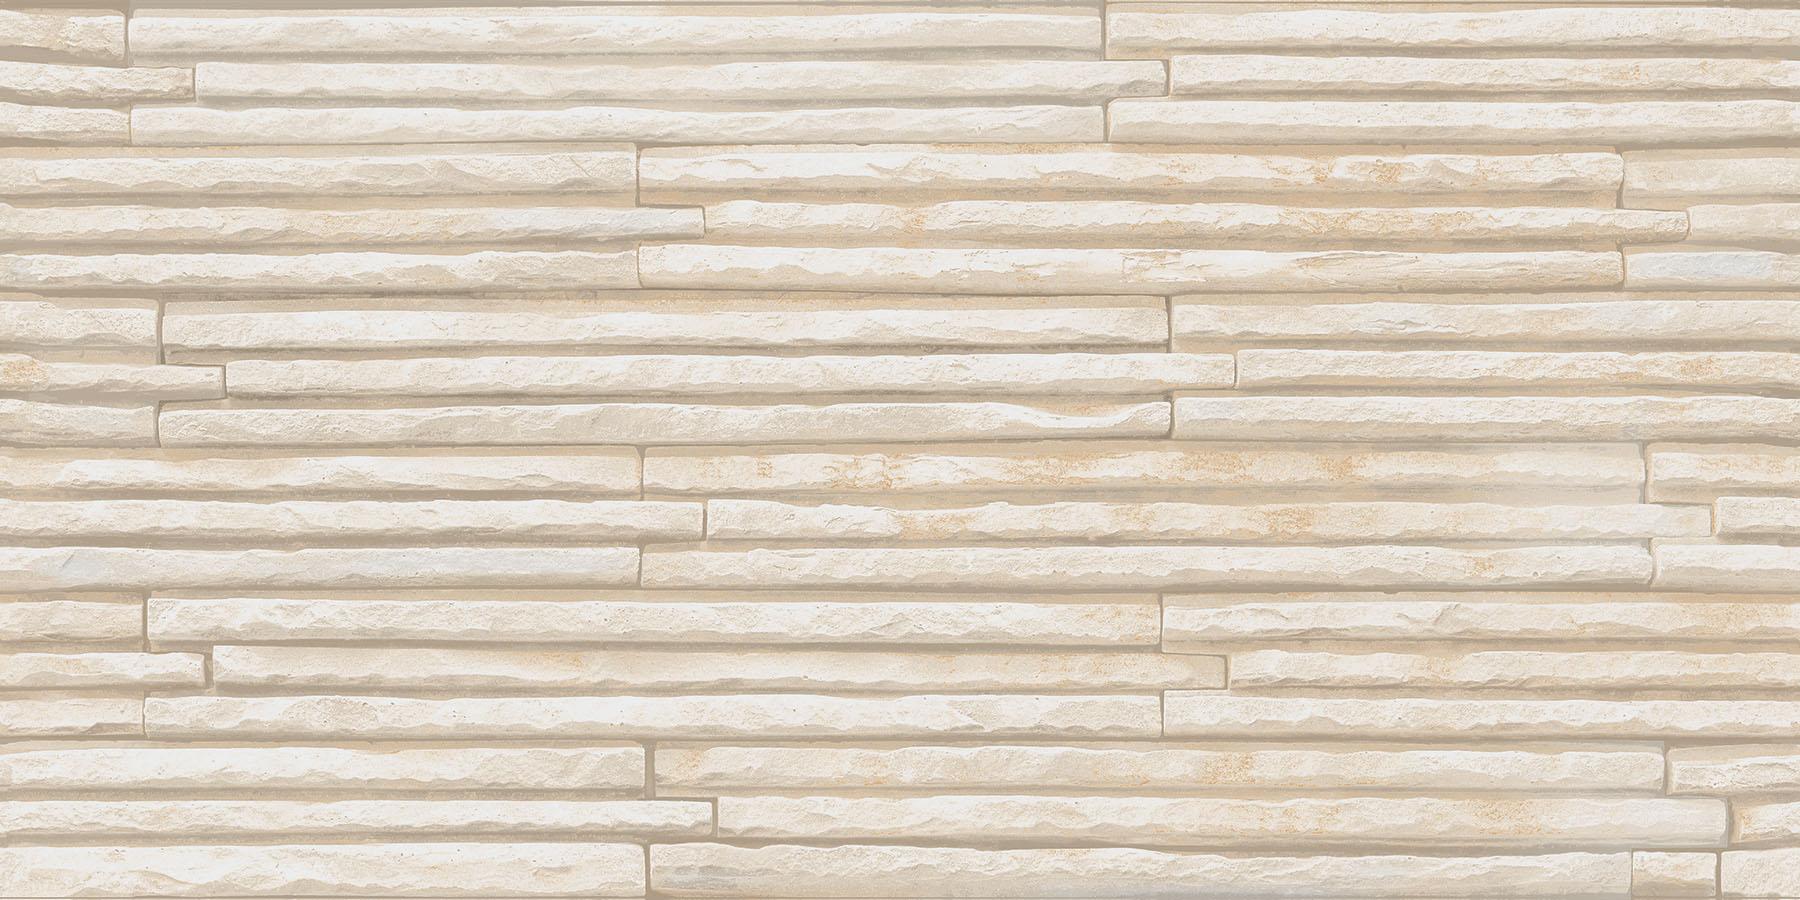 Accent Tiles for Bathroom Tiles, Living Room Tiles, Elevation Tiles, Accent Tiles, Hospital Tiles, Bar/Restaurant, Commercial/Office, Outdoor Area, School & Collages